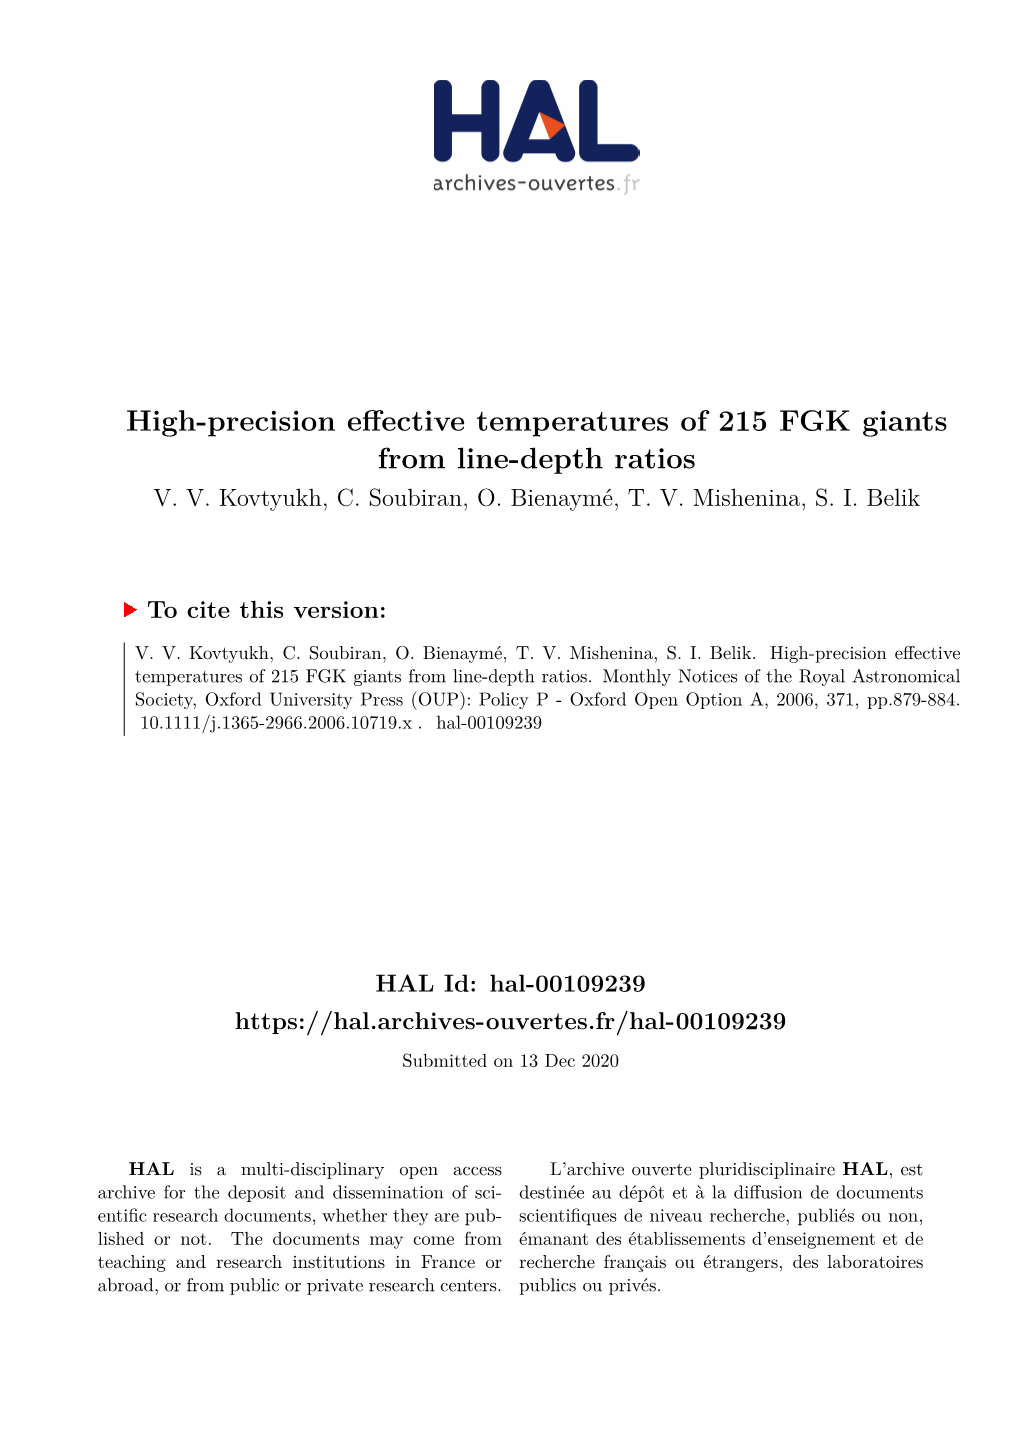 High-Precision Effective Temperatures of 215 FGK Giants from Line-Depth Ratios V